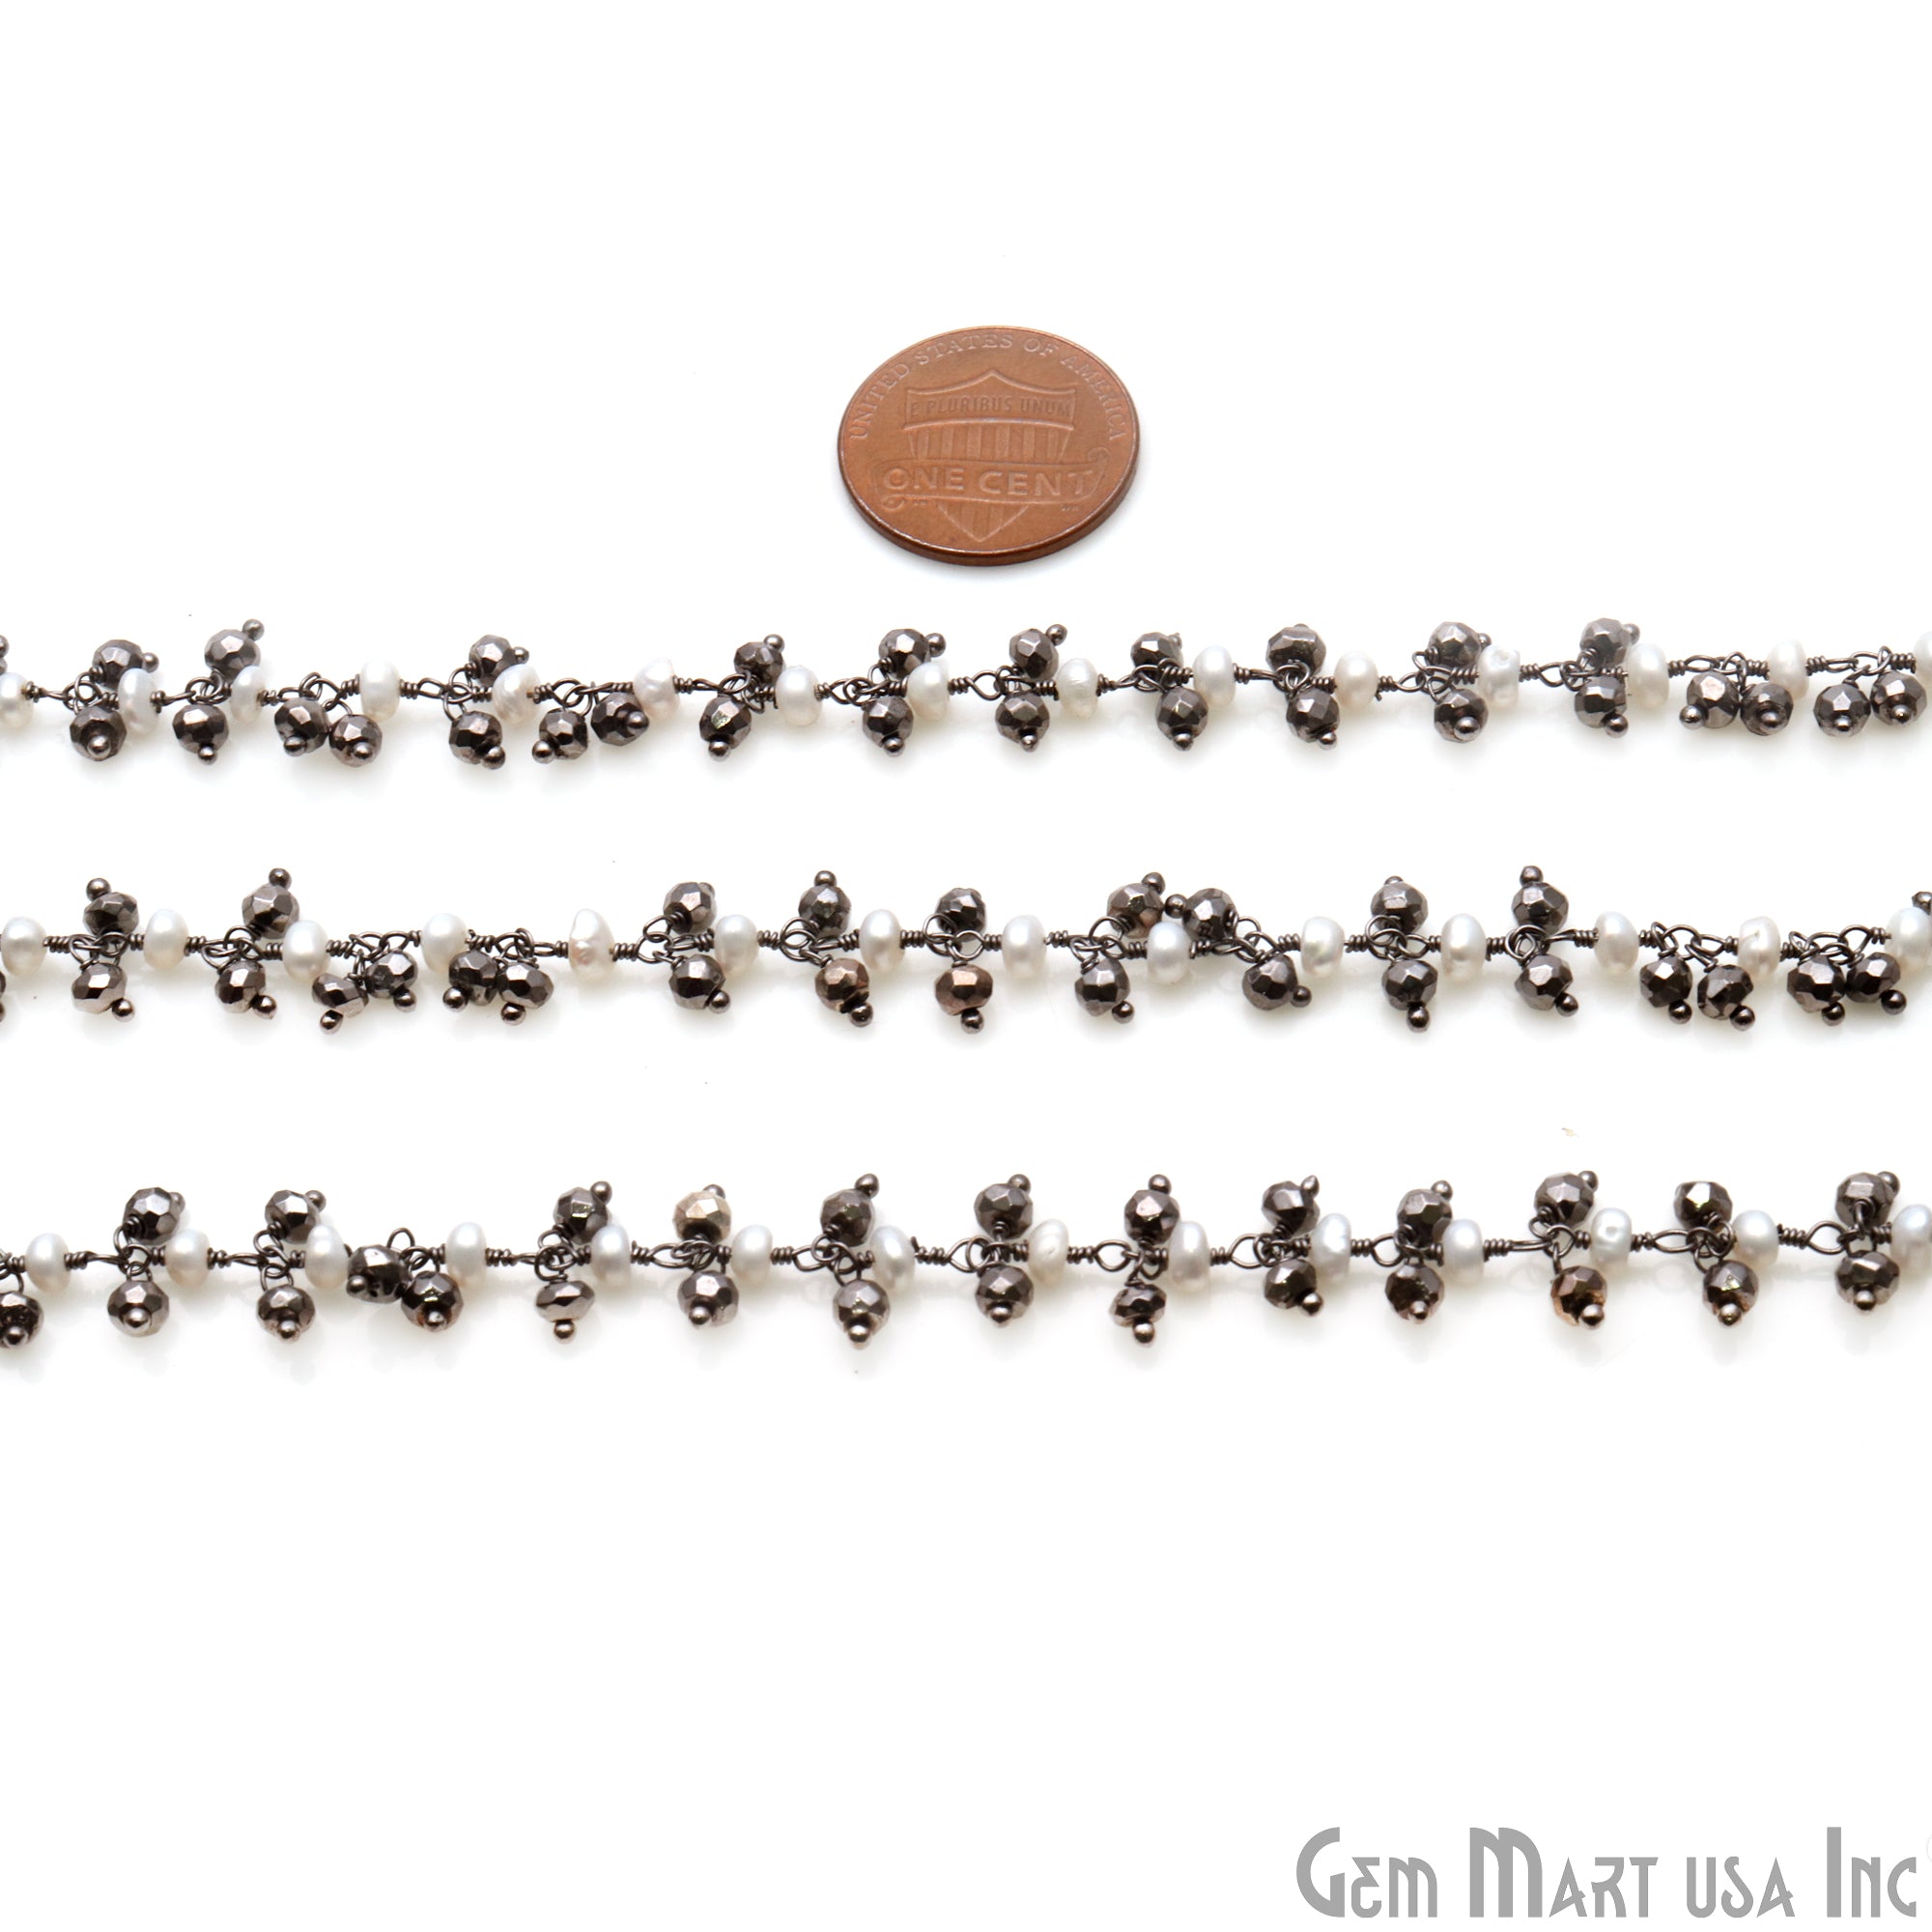 Pyrite With Pearl 2.5-3m Oxidized Wire Wrapped Cluster Rosary Chain - GemMartUSA